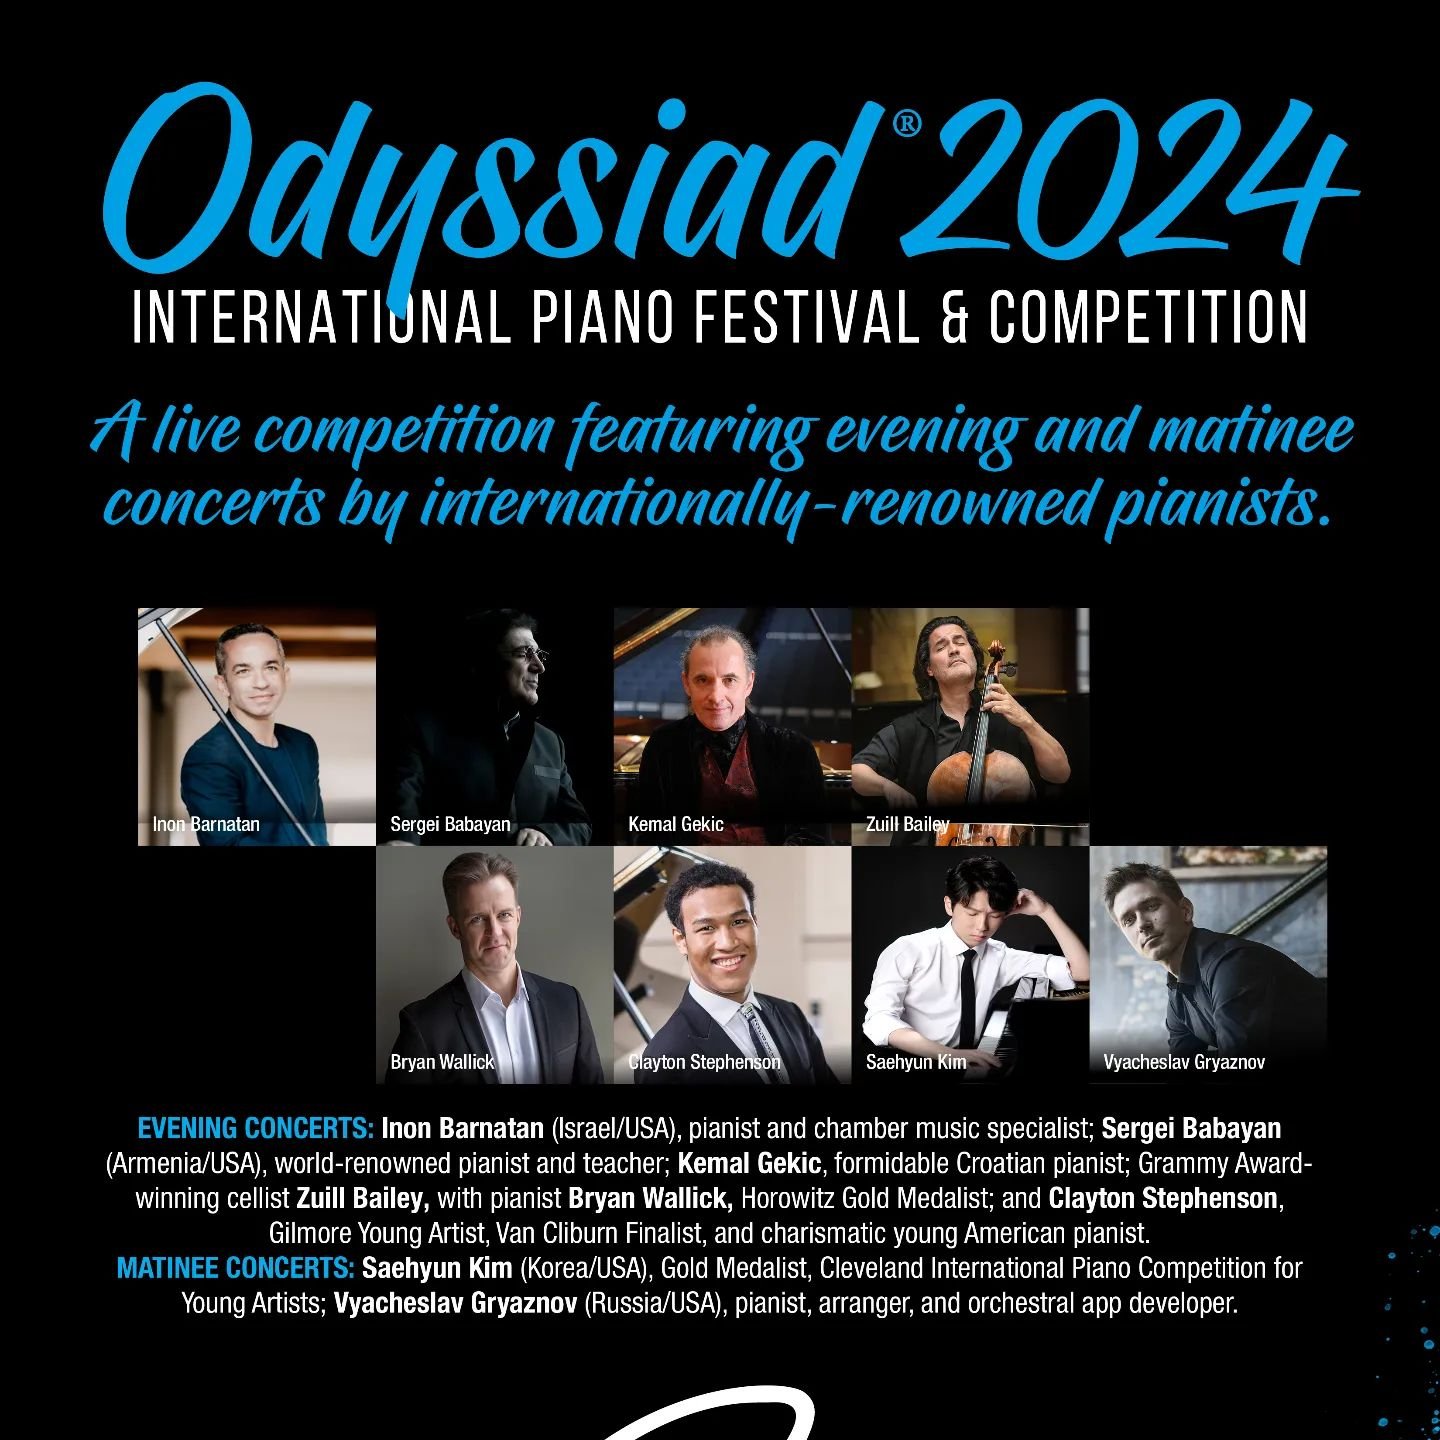 Enjoy five evening concerts &amp; two matinee concerts featuring some of the most distinguished and trailblazing keyboard virtuosos and specialists of our time, including several in the pantheon of all-time great pianists and teachers!

Tickets on sa